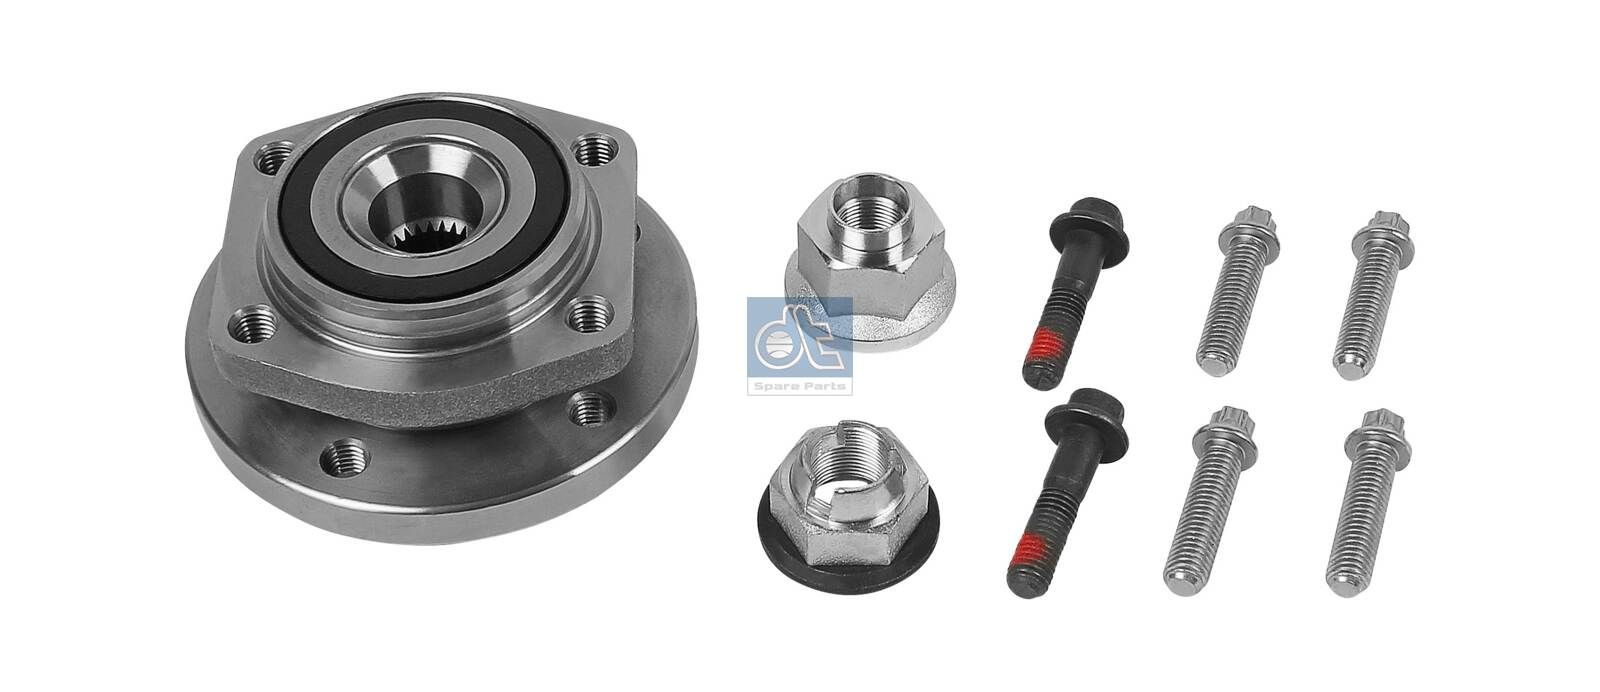 DT Spare Parts 2.15425 Wheel bearing kit 91 400 92